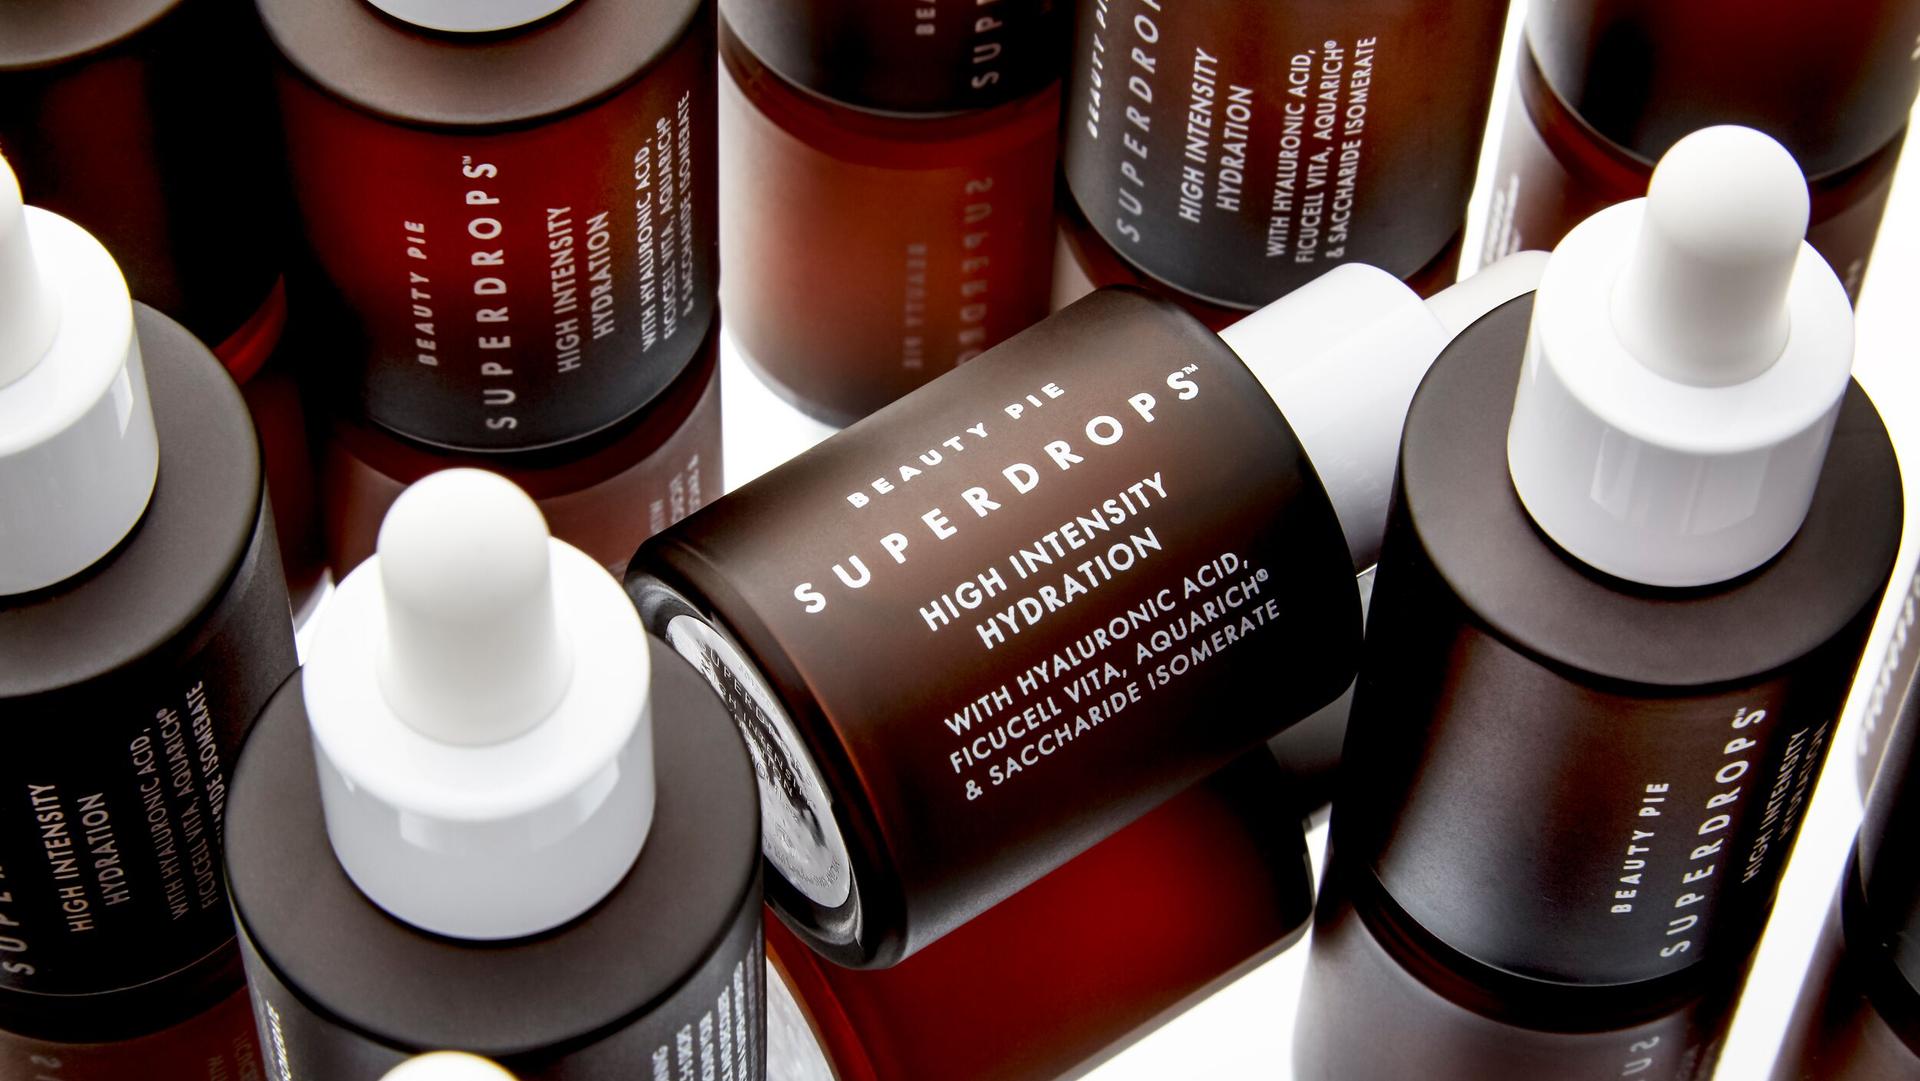 Superdrops High Intensity Hydration